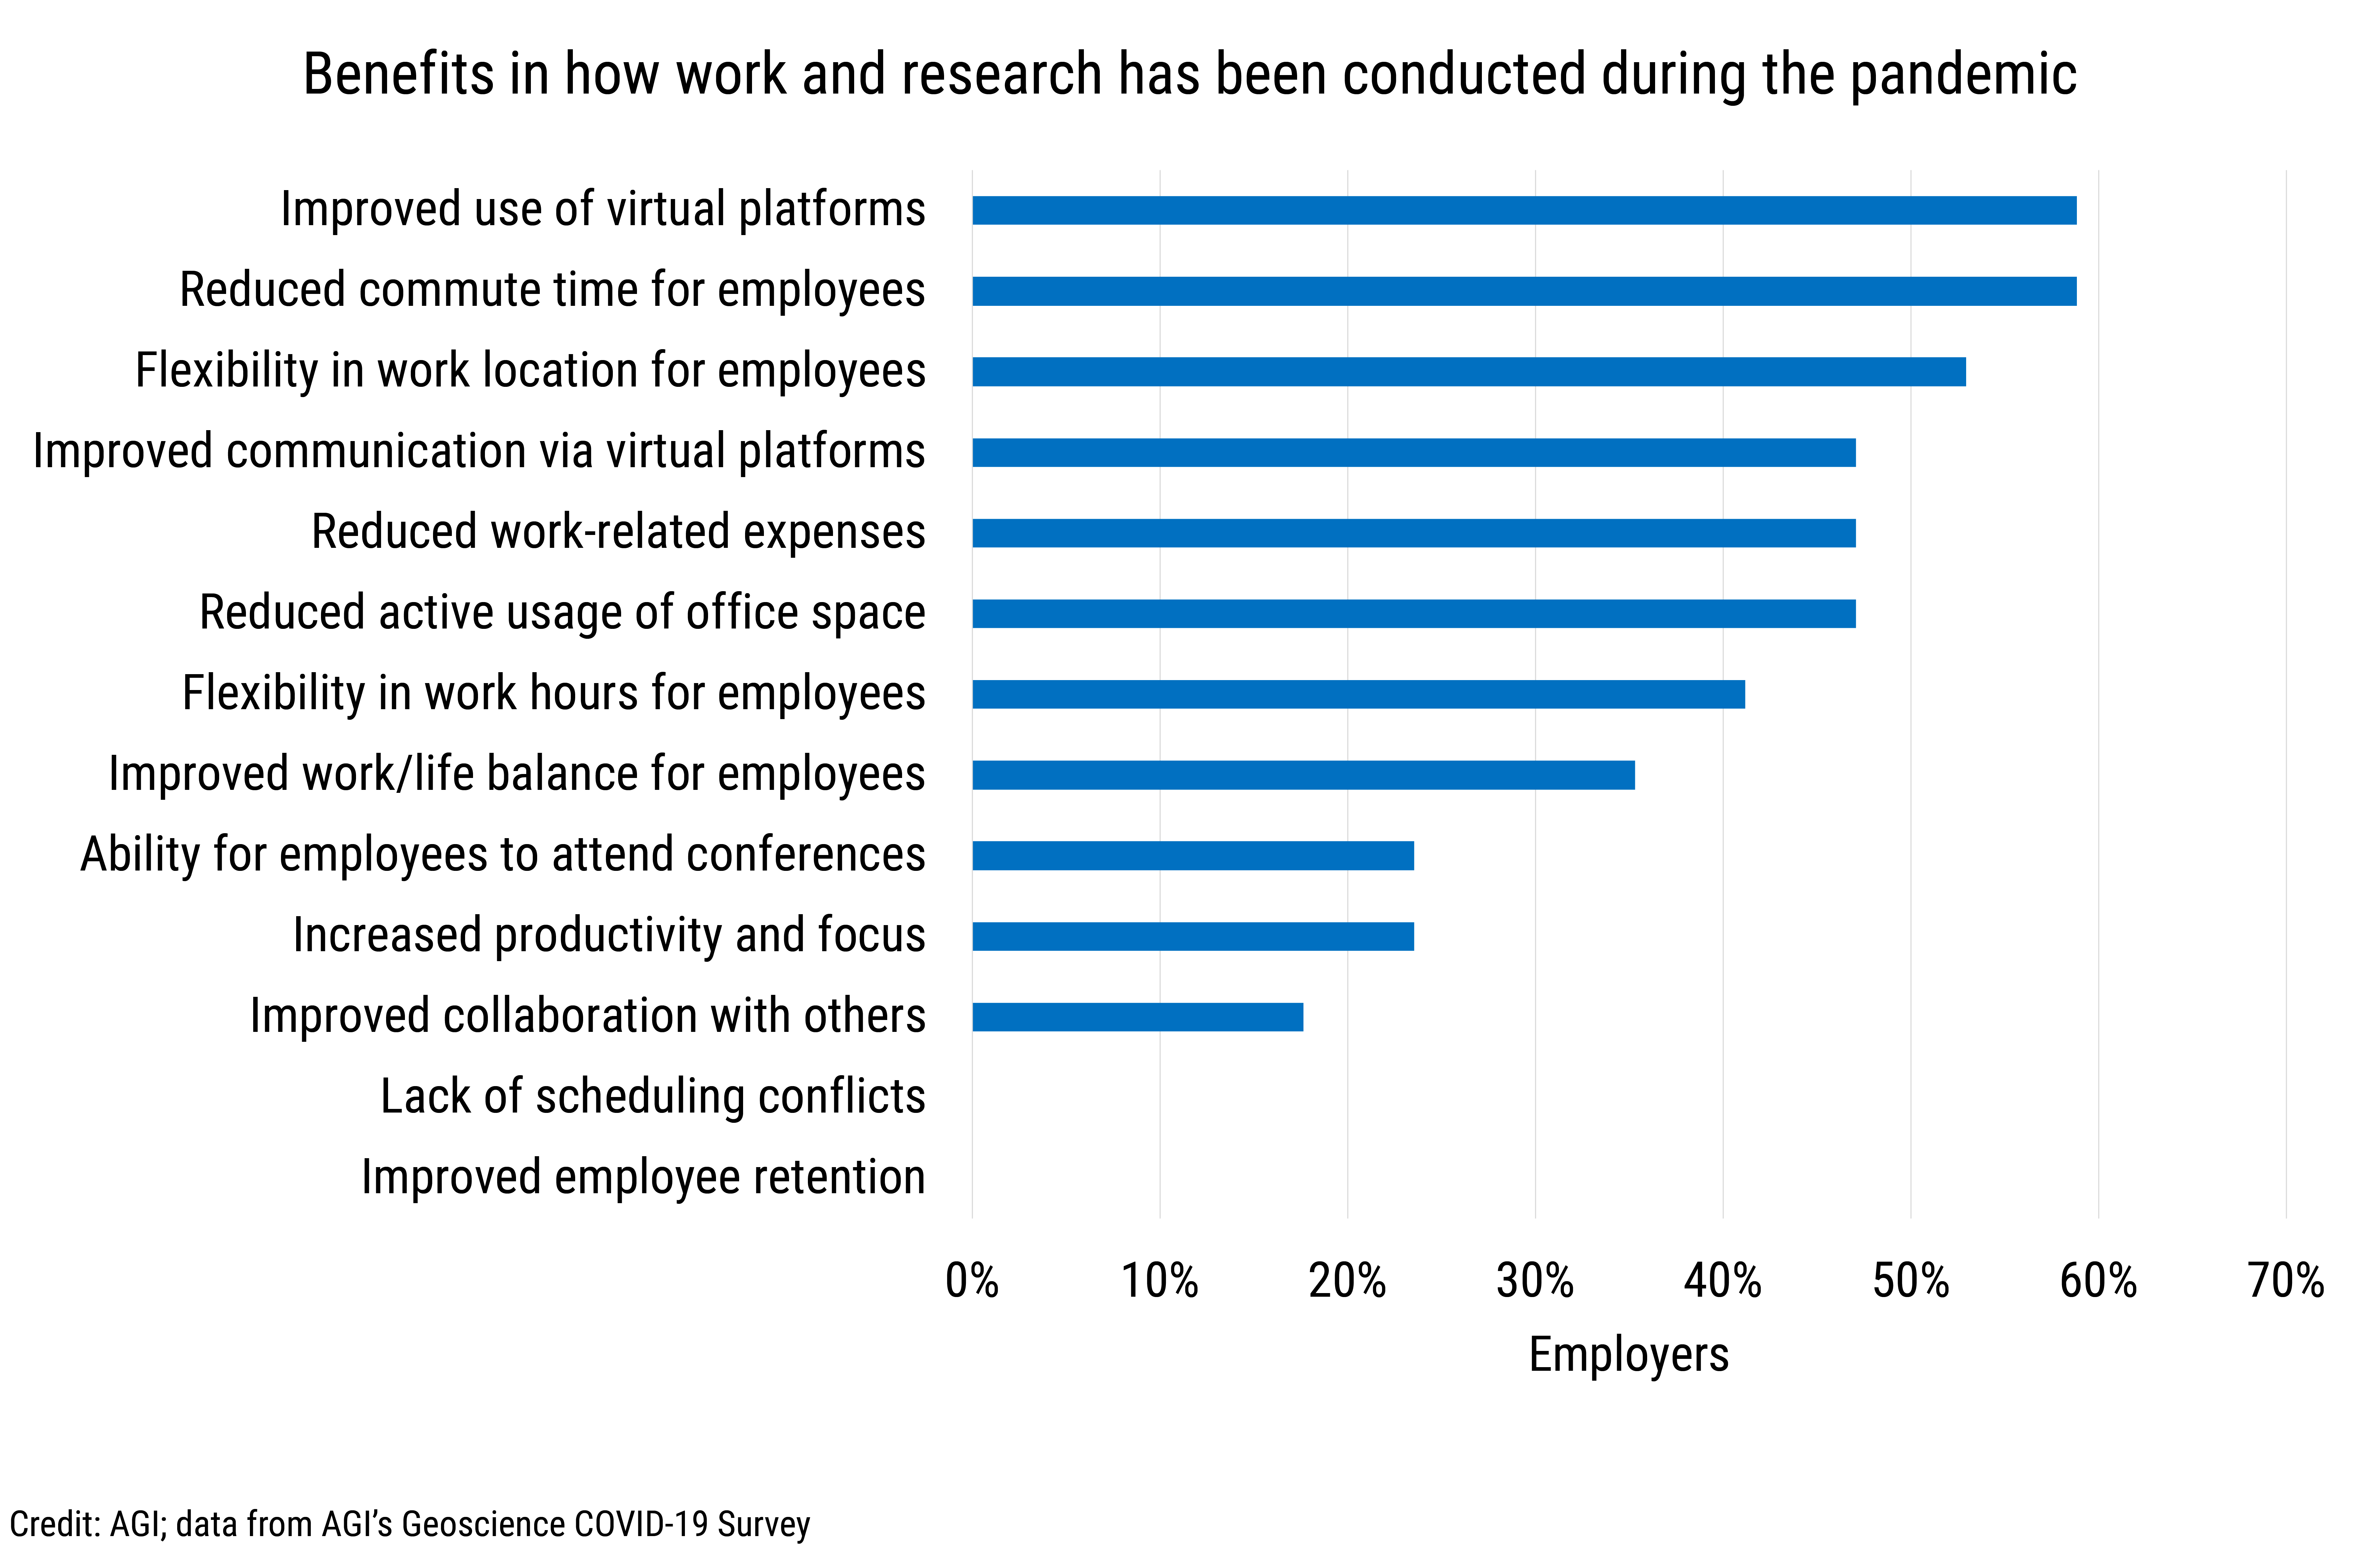 DB_2022-002 chart 09: Benefits in how work and research has been conducted during the pandemic (Credit: AGI; data from AGI's Geoscience COVID-19 Survey)